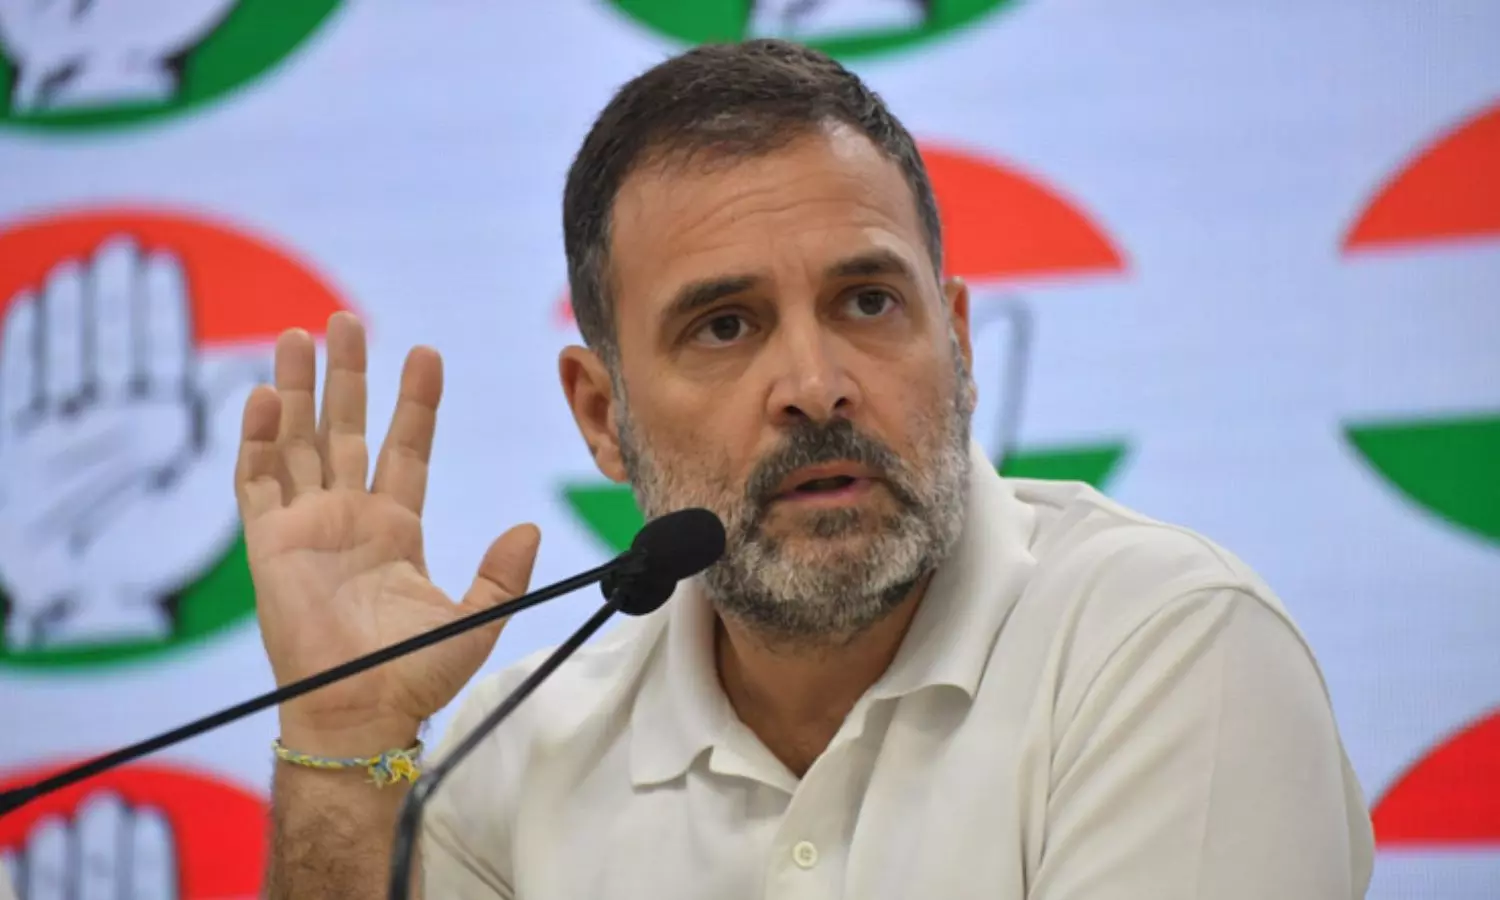 Hindu society is not only Prime Minister Modi Says Rahul Gandhi